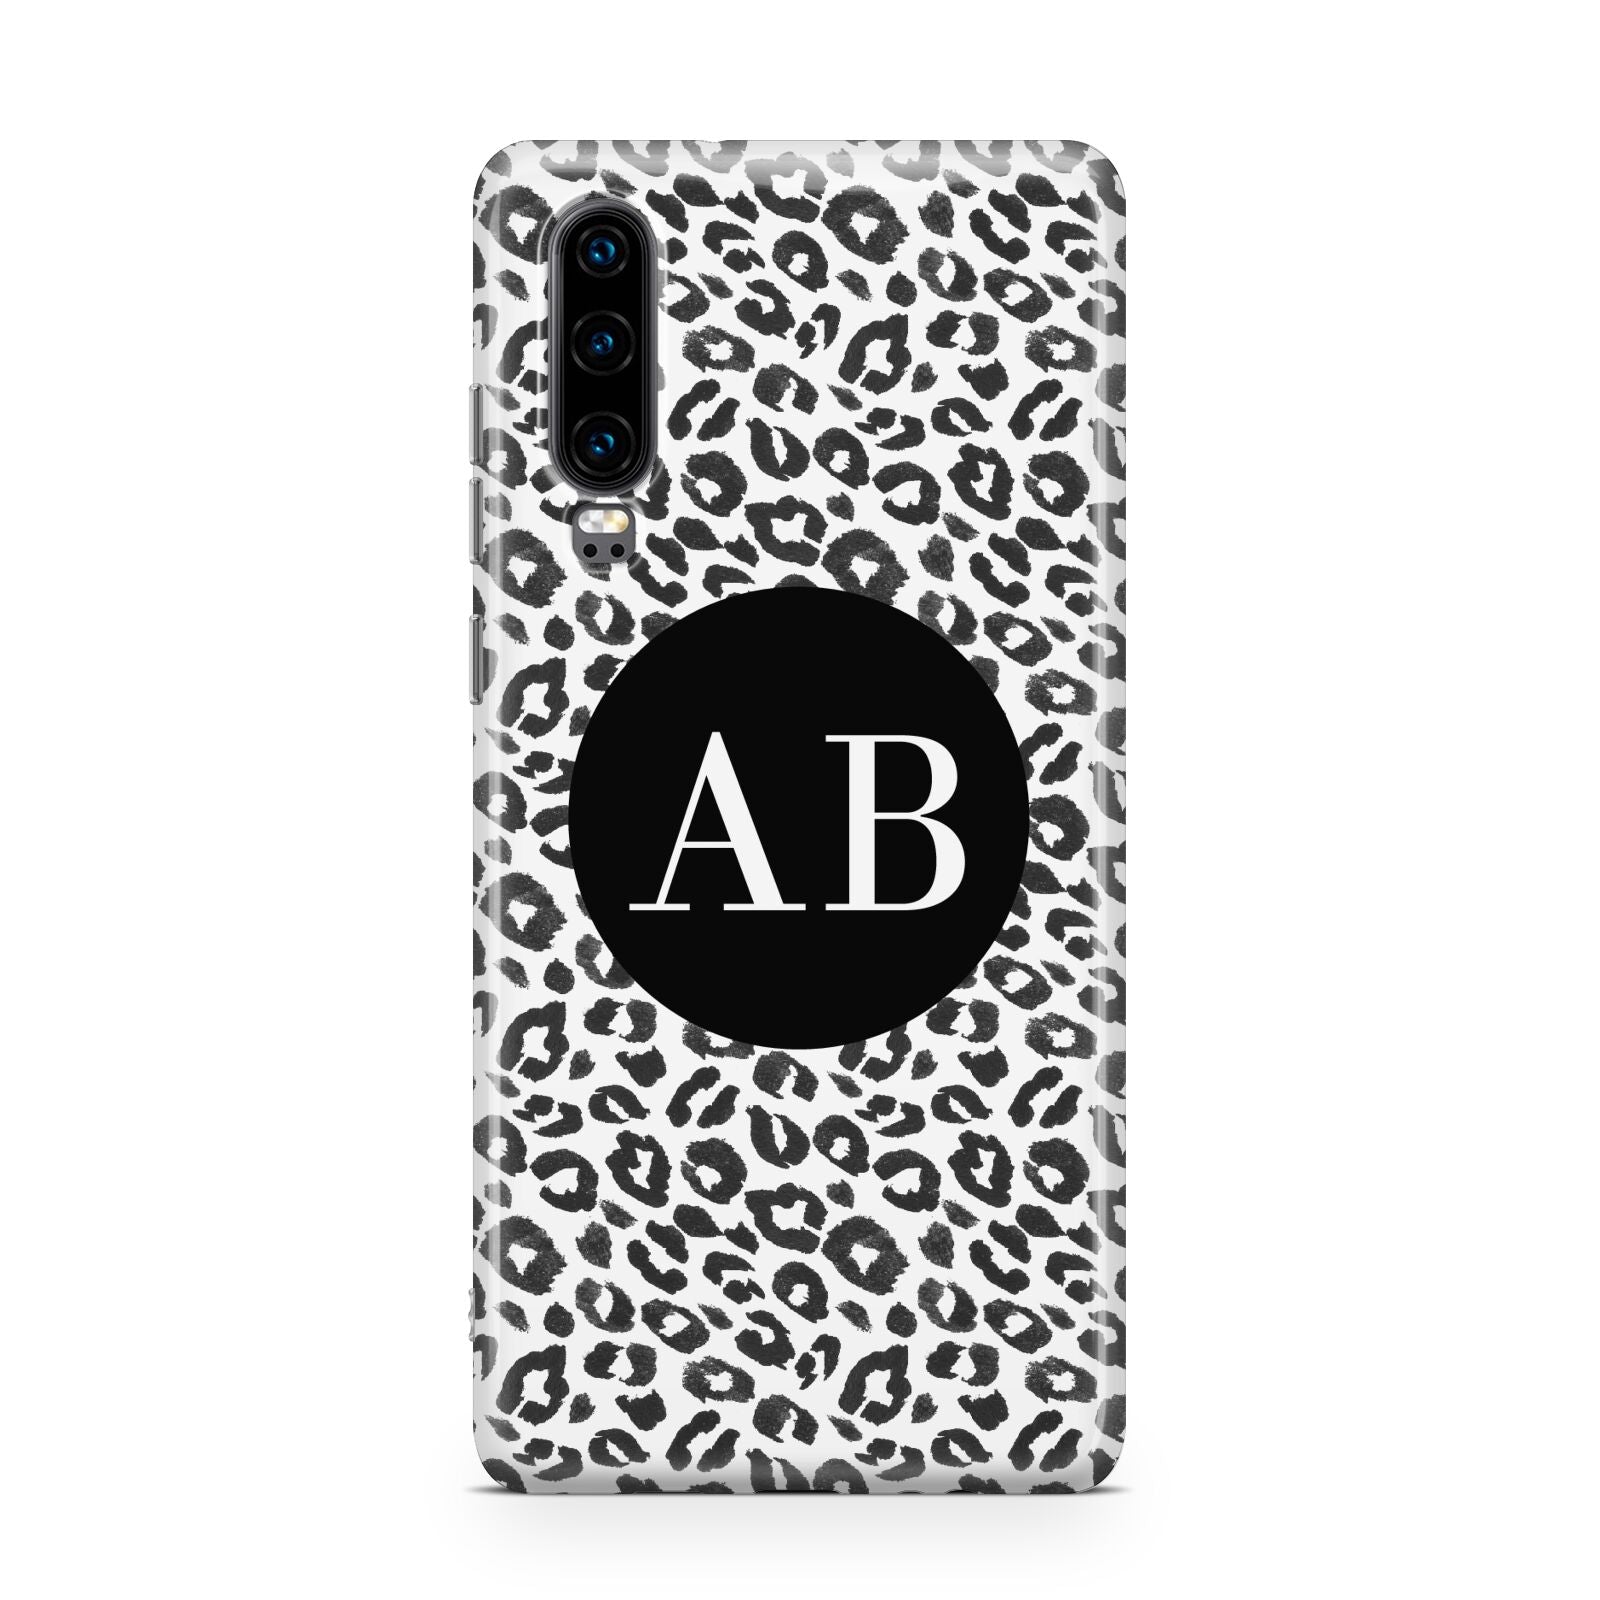 Leopard Print Black and White Huawei P30 Phone Case